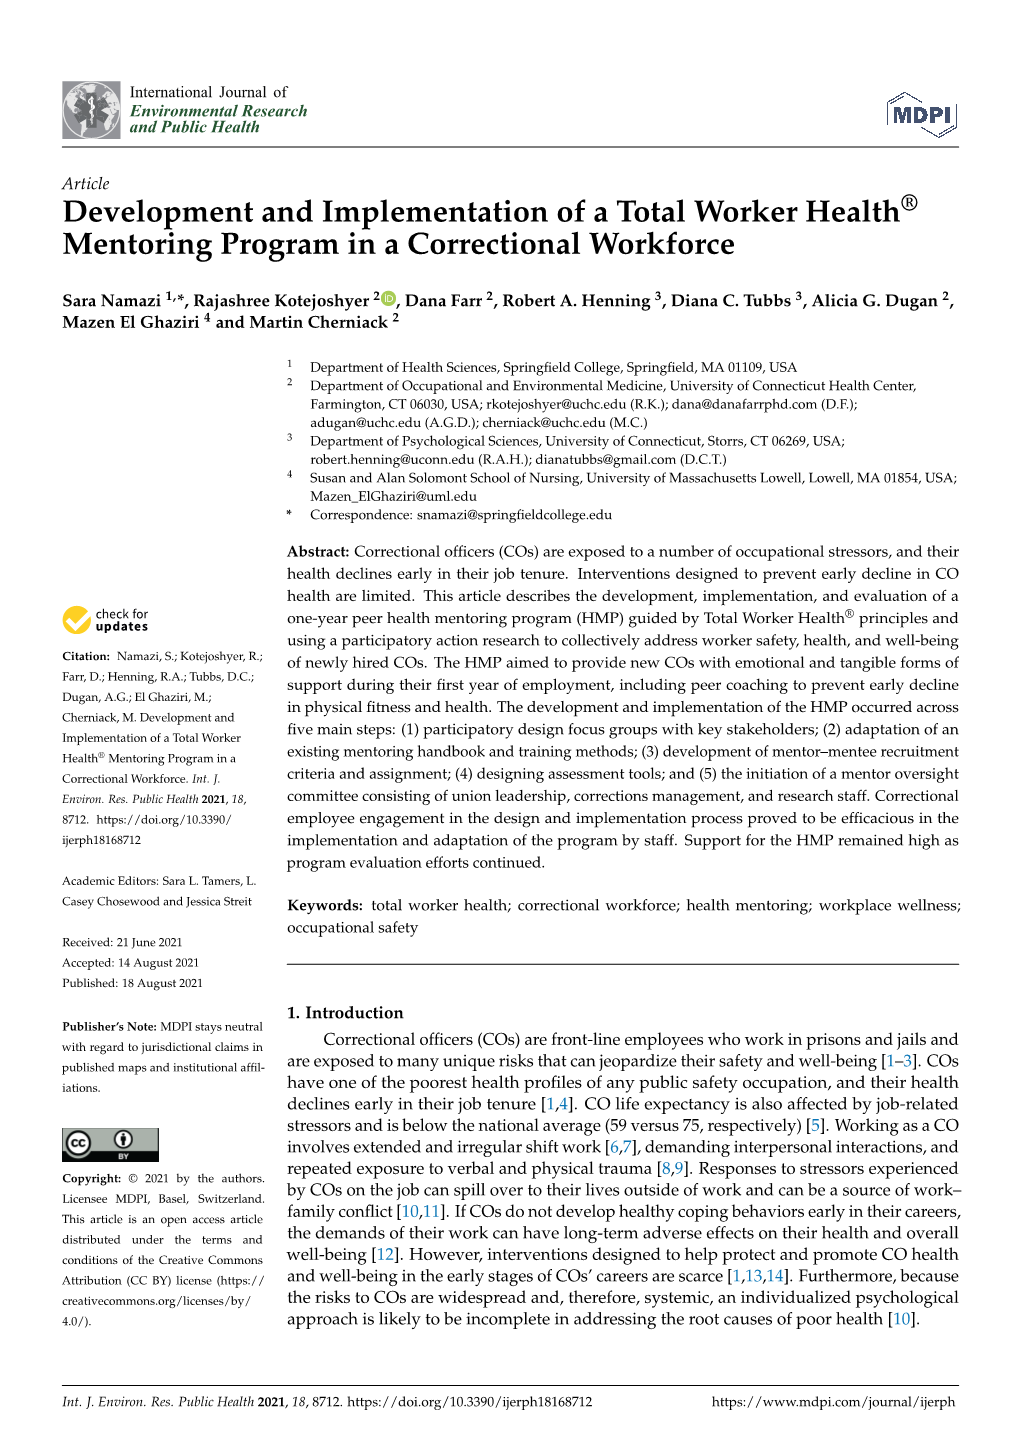 Development and Implementation of a Total Worker Health® Mentoring Program in a Correctional Workforce